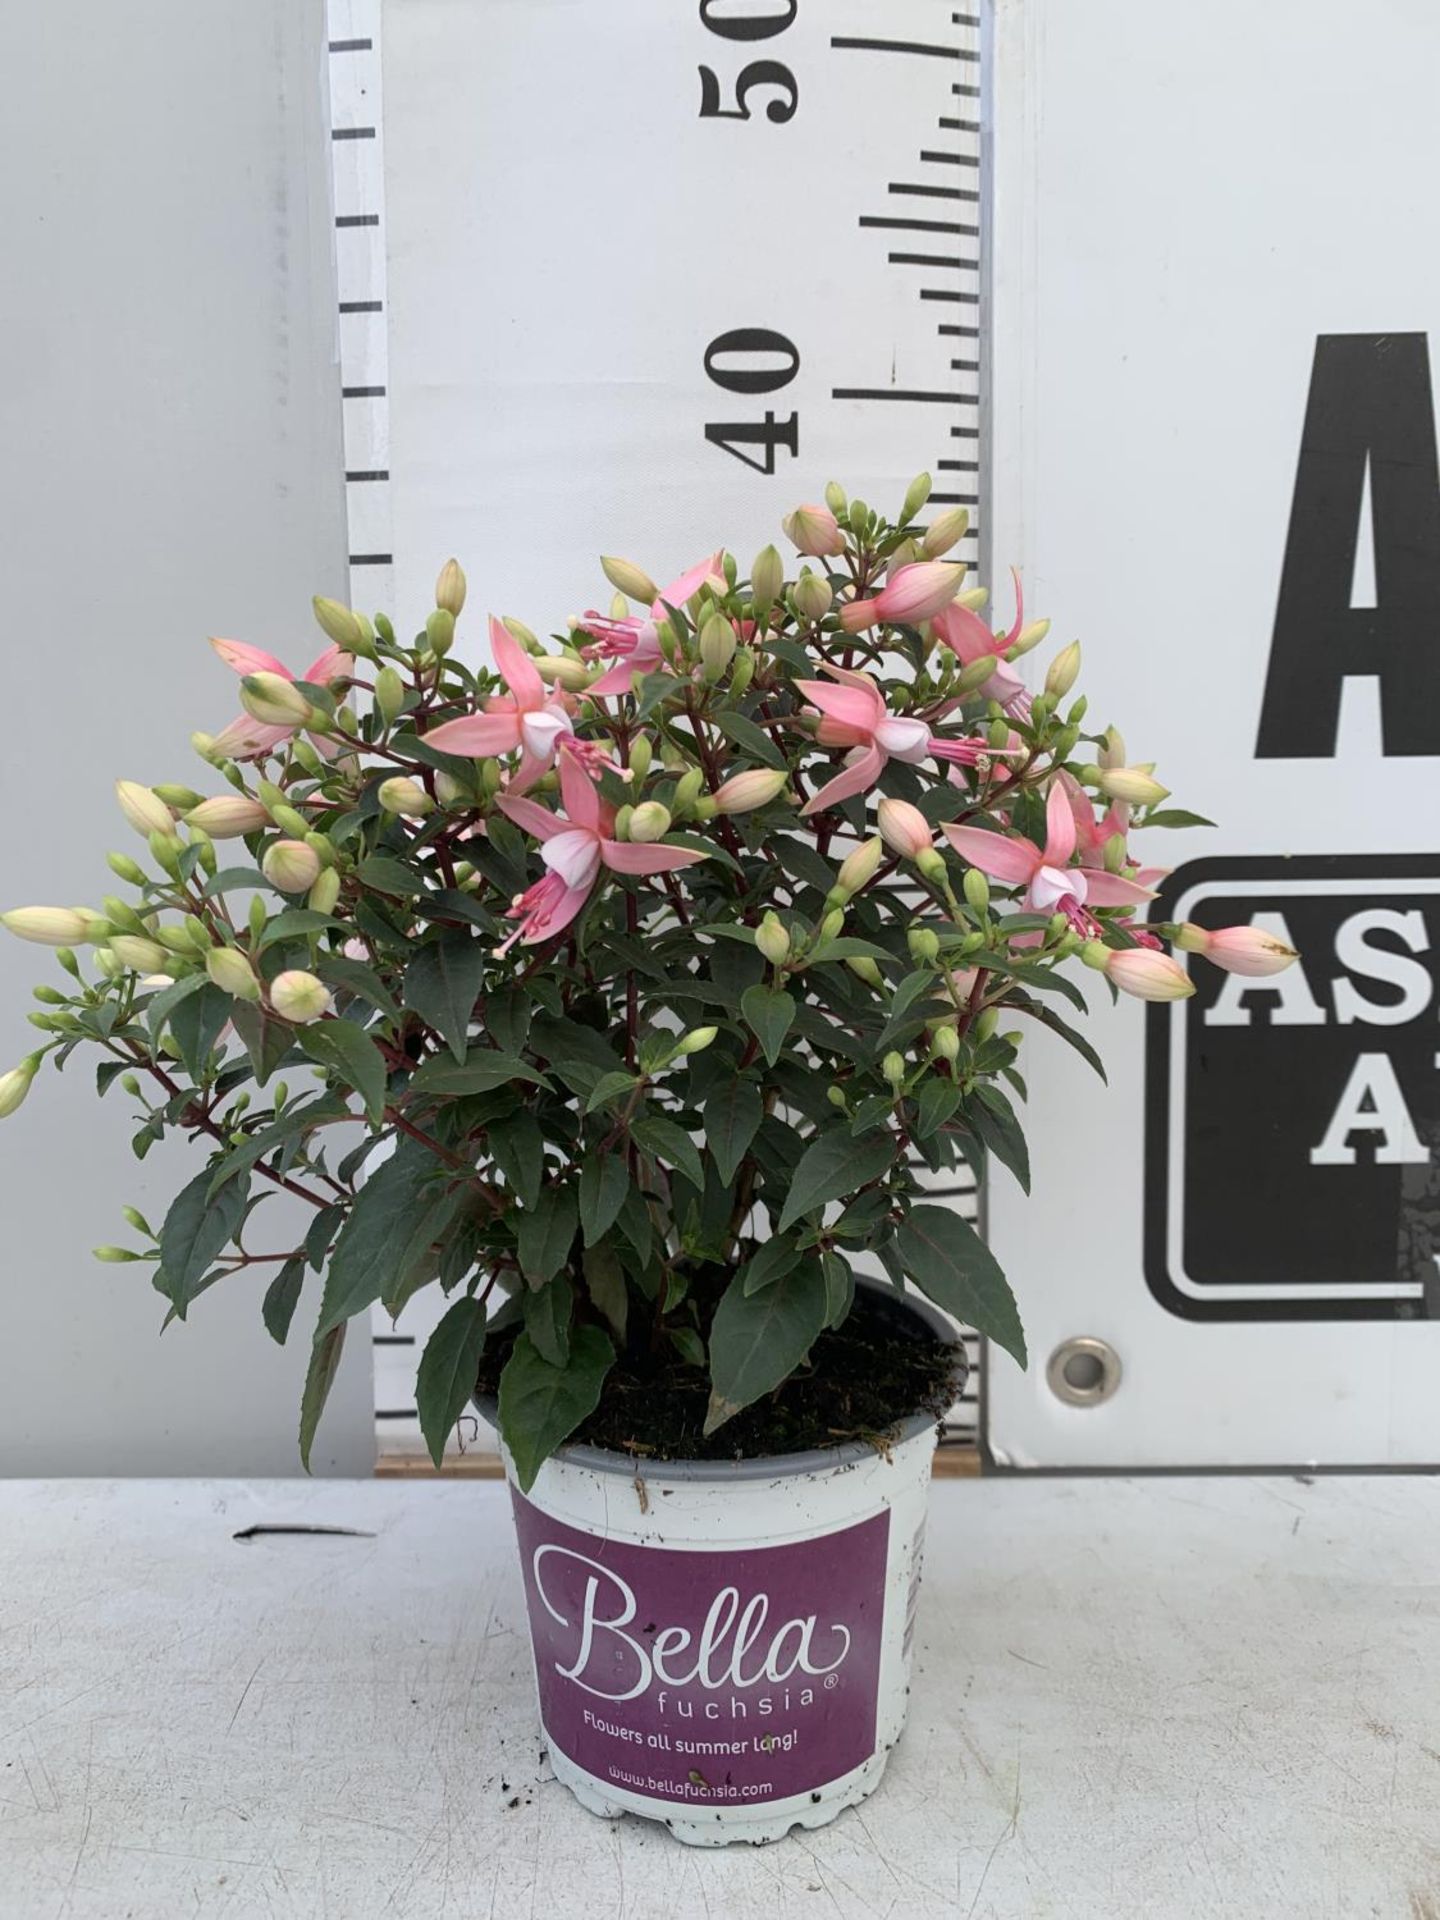 NINE FUCHSIA BELLA PINK IN 20CM POTS 20-30CM TALL TO BE SOLD FOR THE NINE PLUS VAT - Image 3 of 6